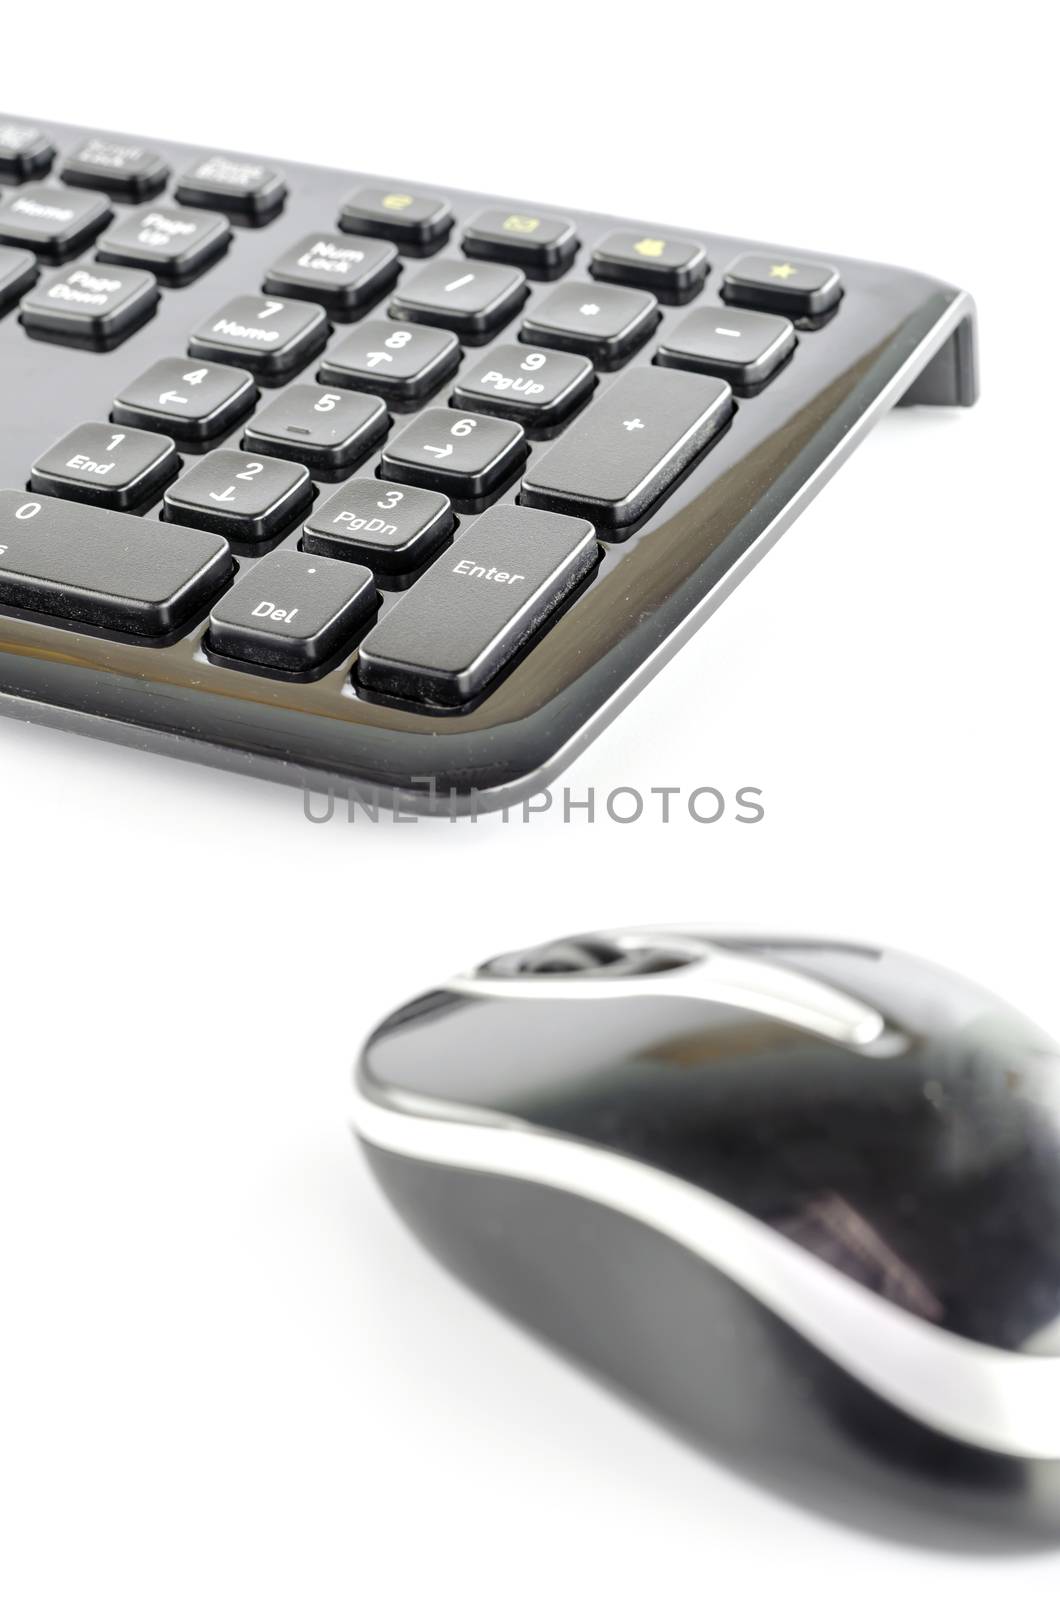 keyboard and wireless mouse on a white background